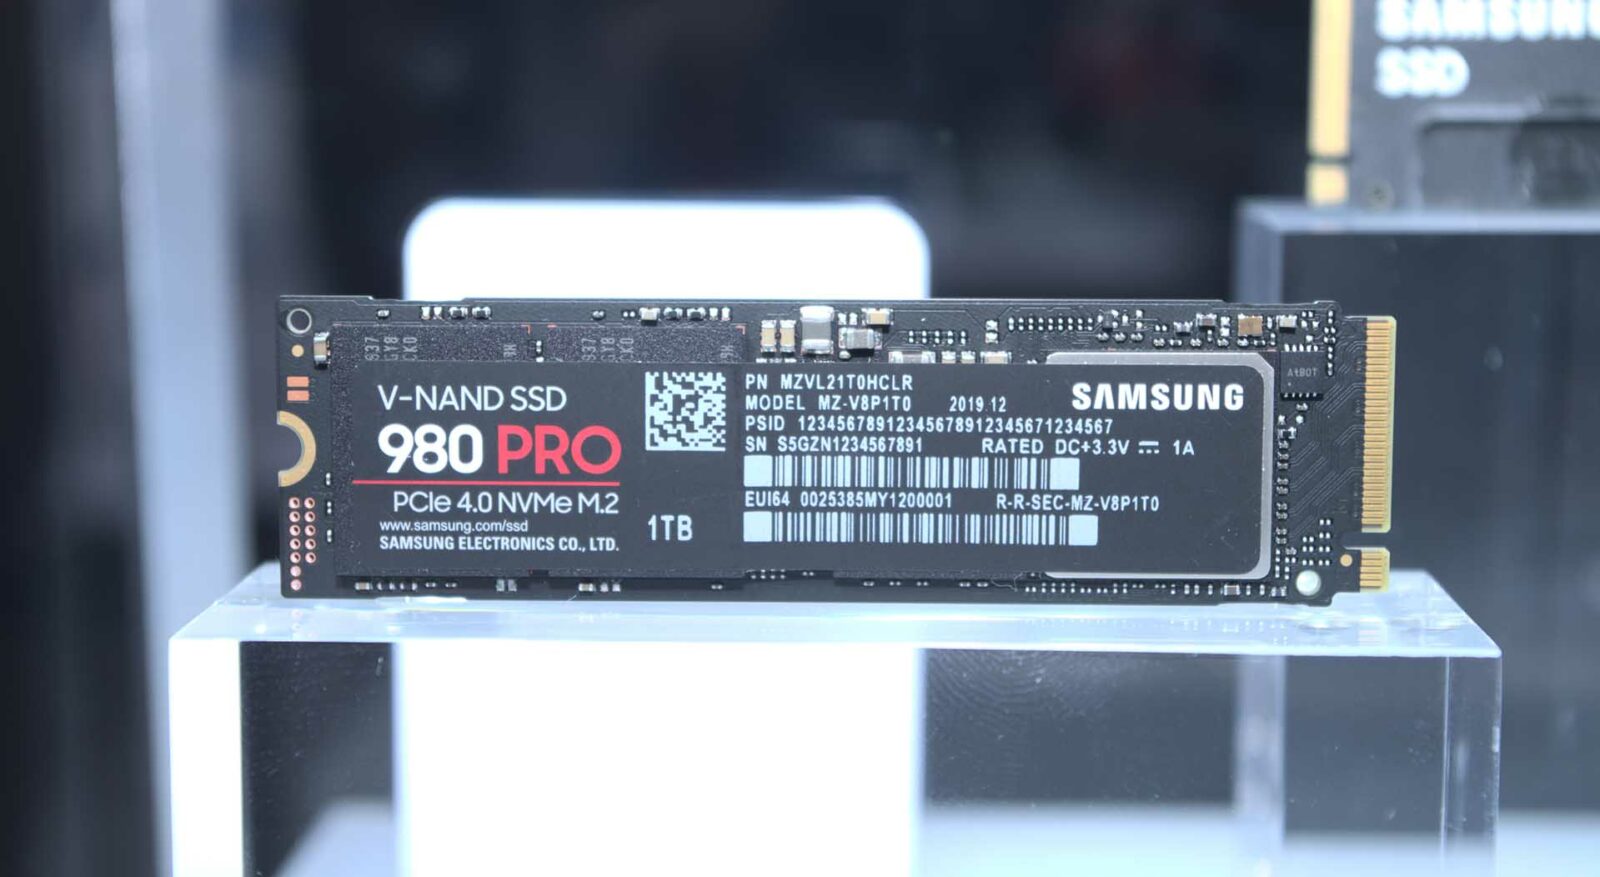 Samsung 980 Pro PCIe 4.0 SSD at CES